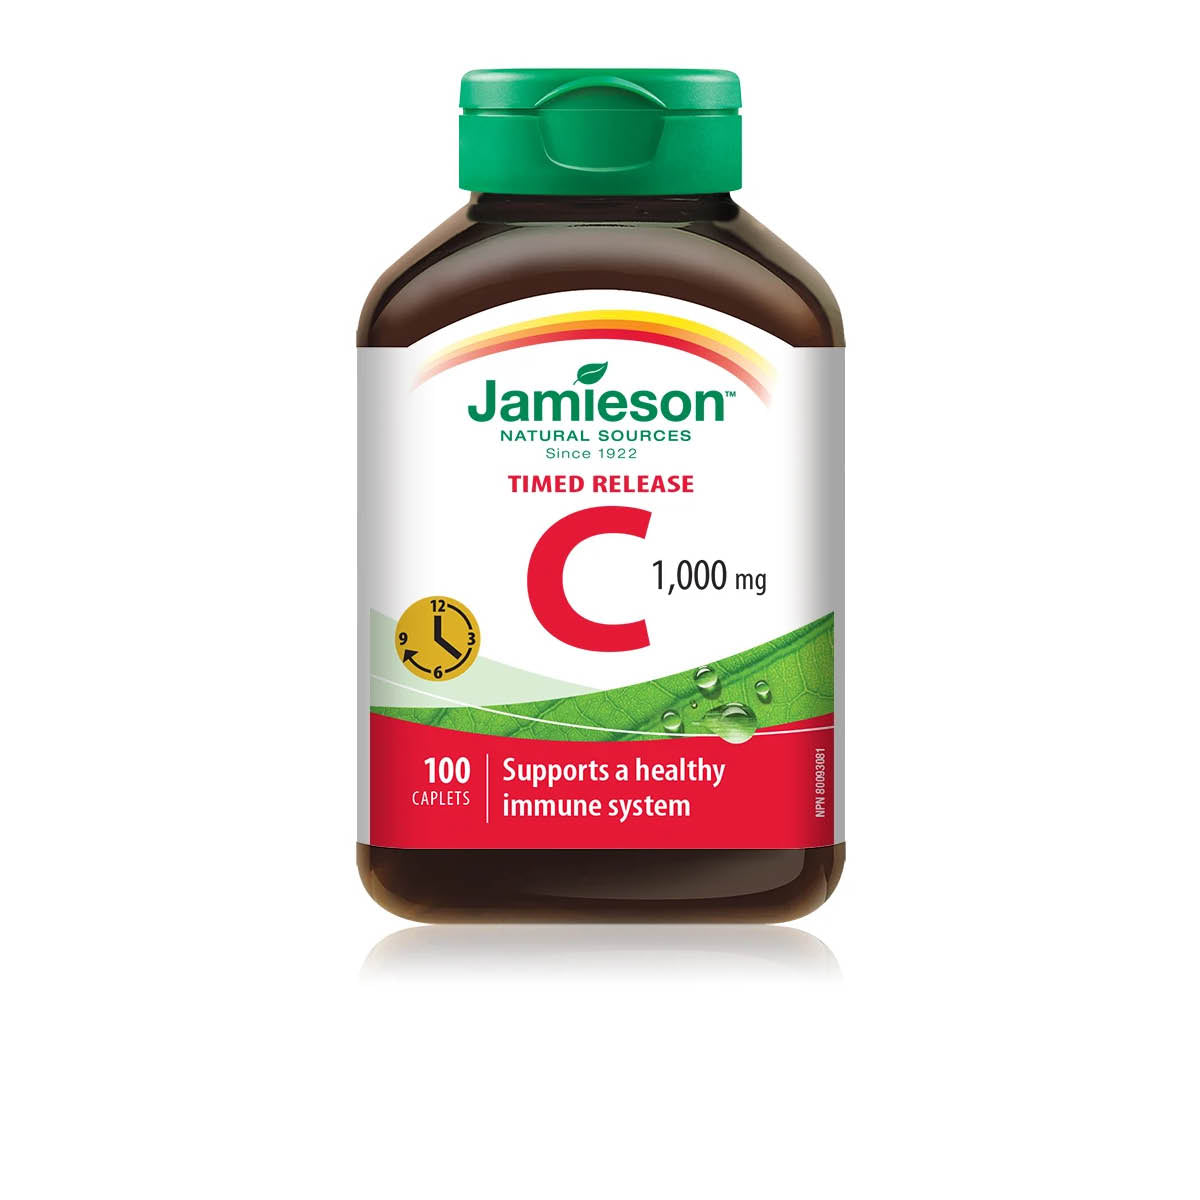 Jamieson Vitamin C extended release 1000 mg